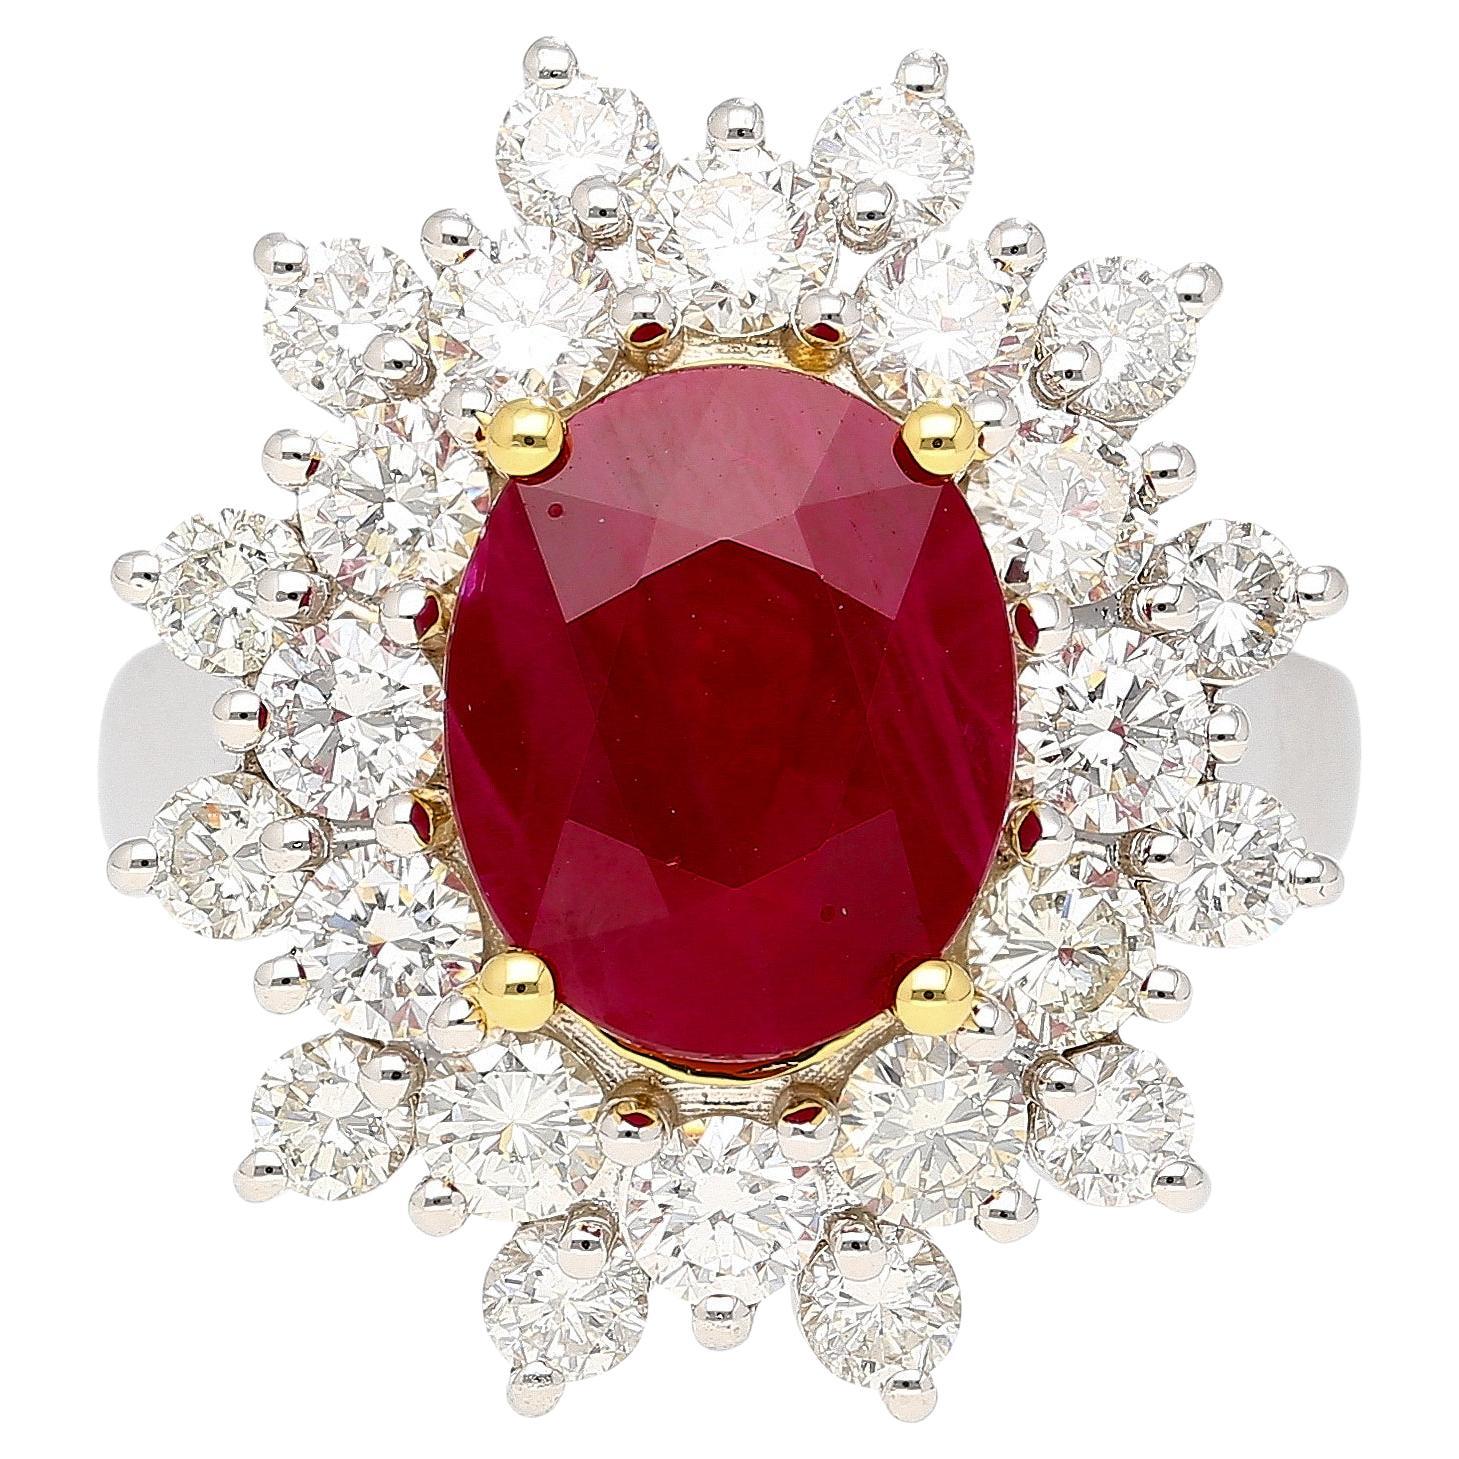 How much is Burmese ruby per carat?